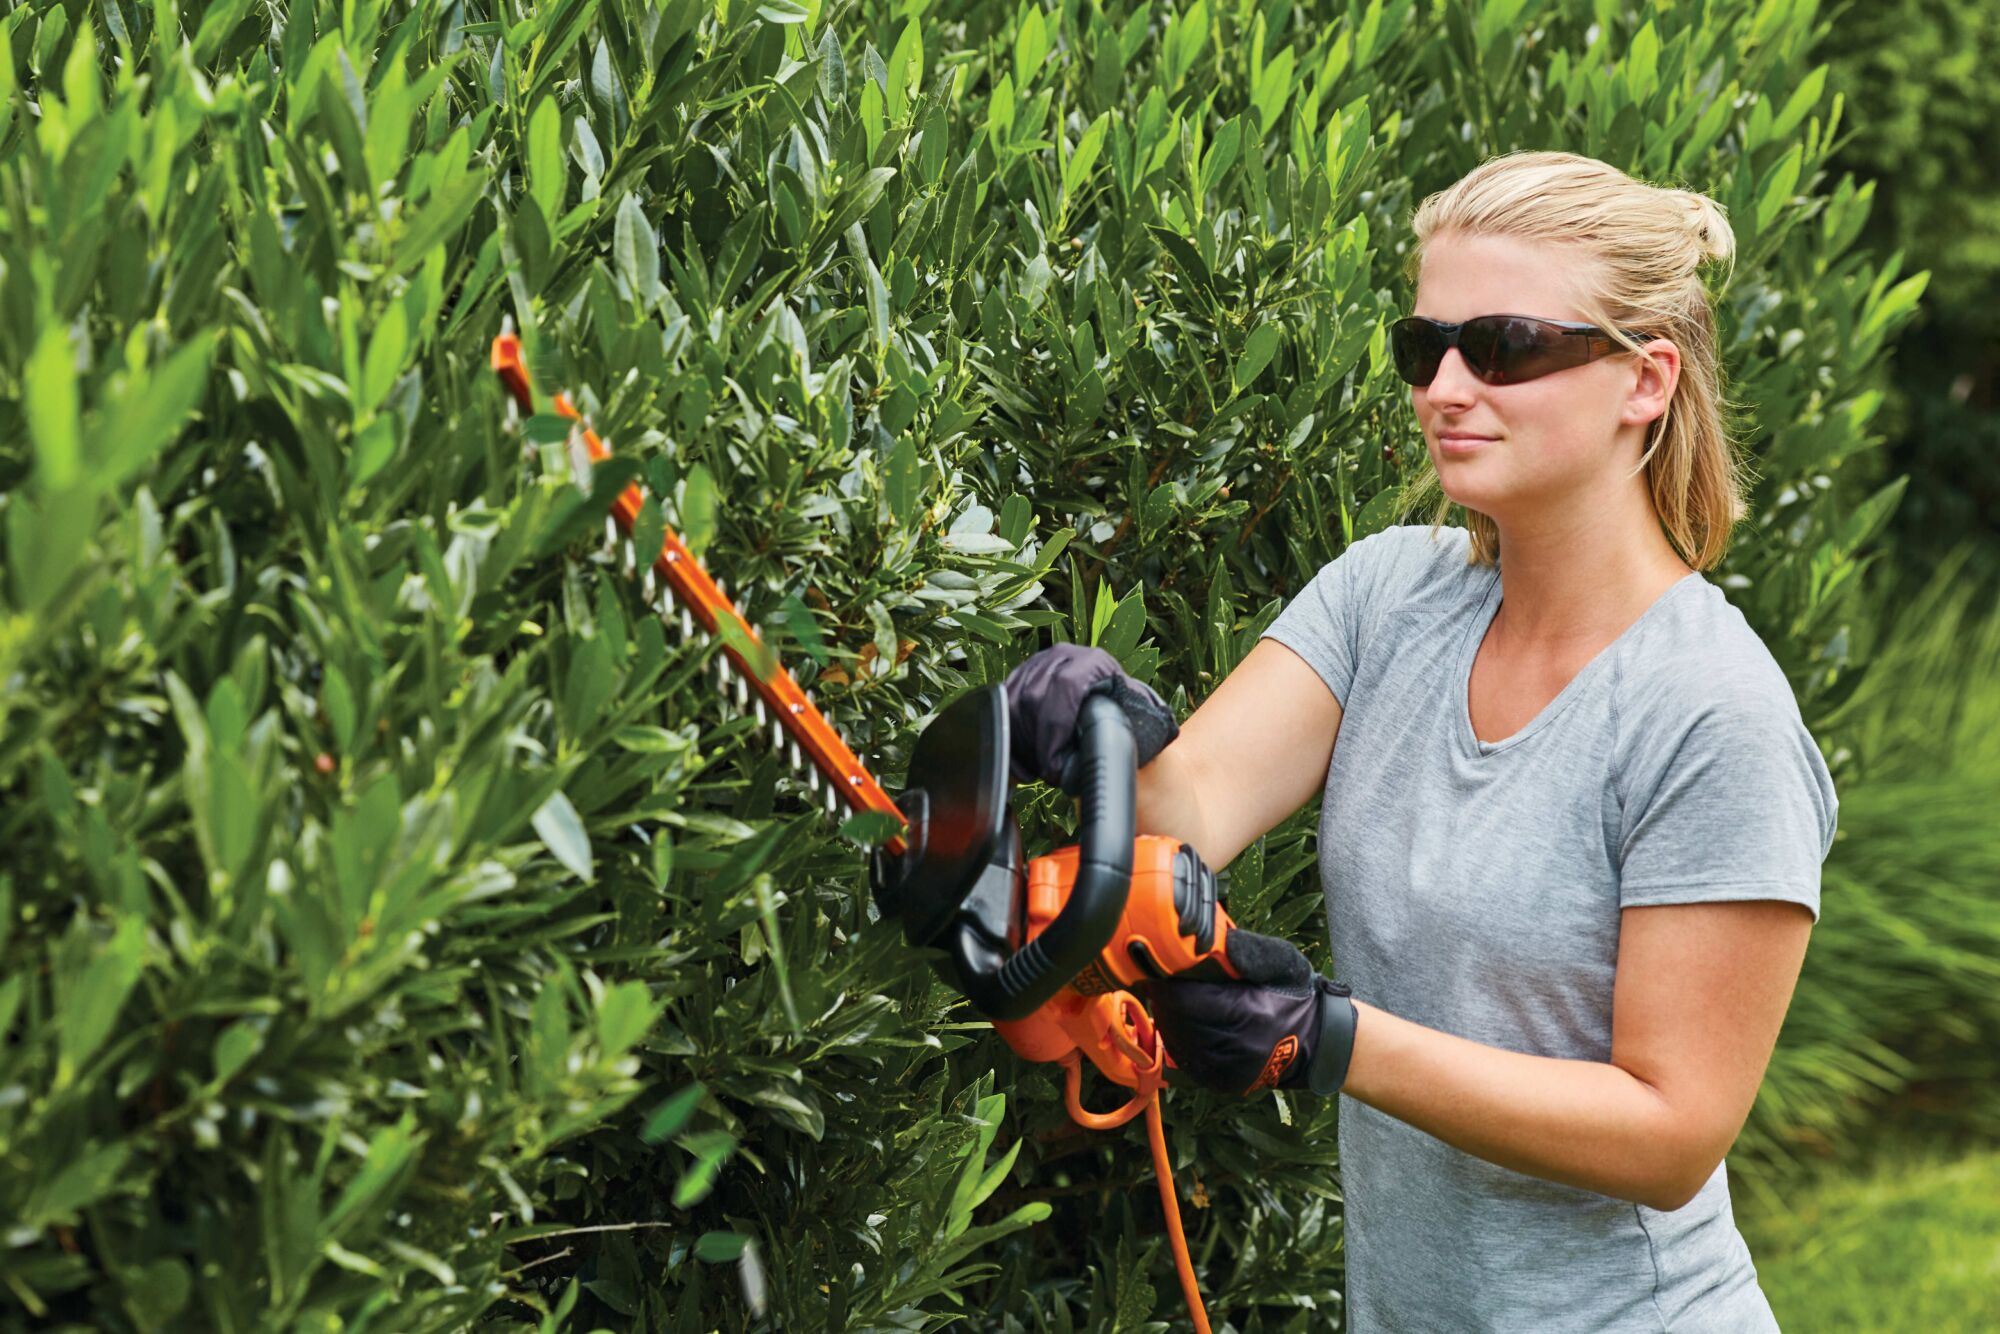 18 inch Electric Hedge Trimmer being used by person to trim hedge outdoors.